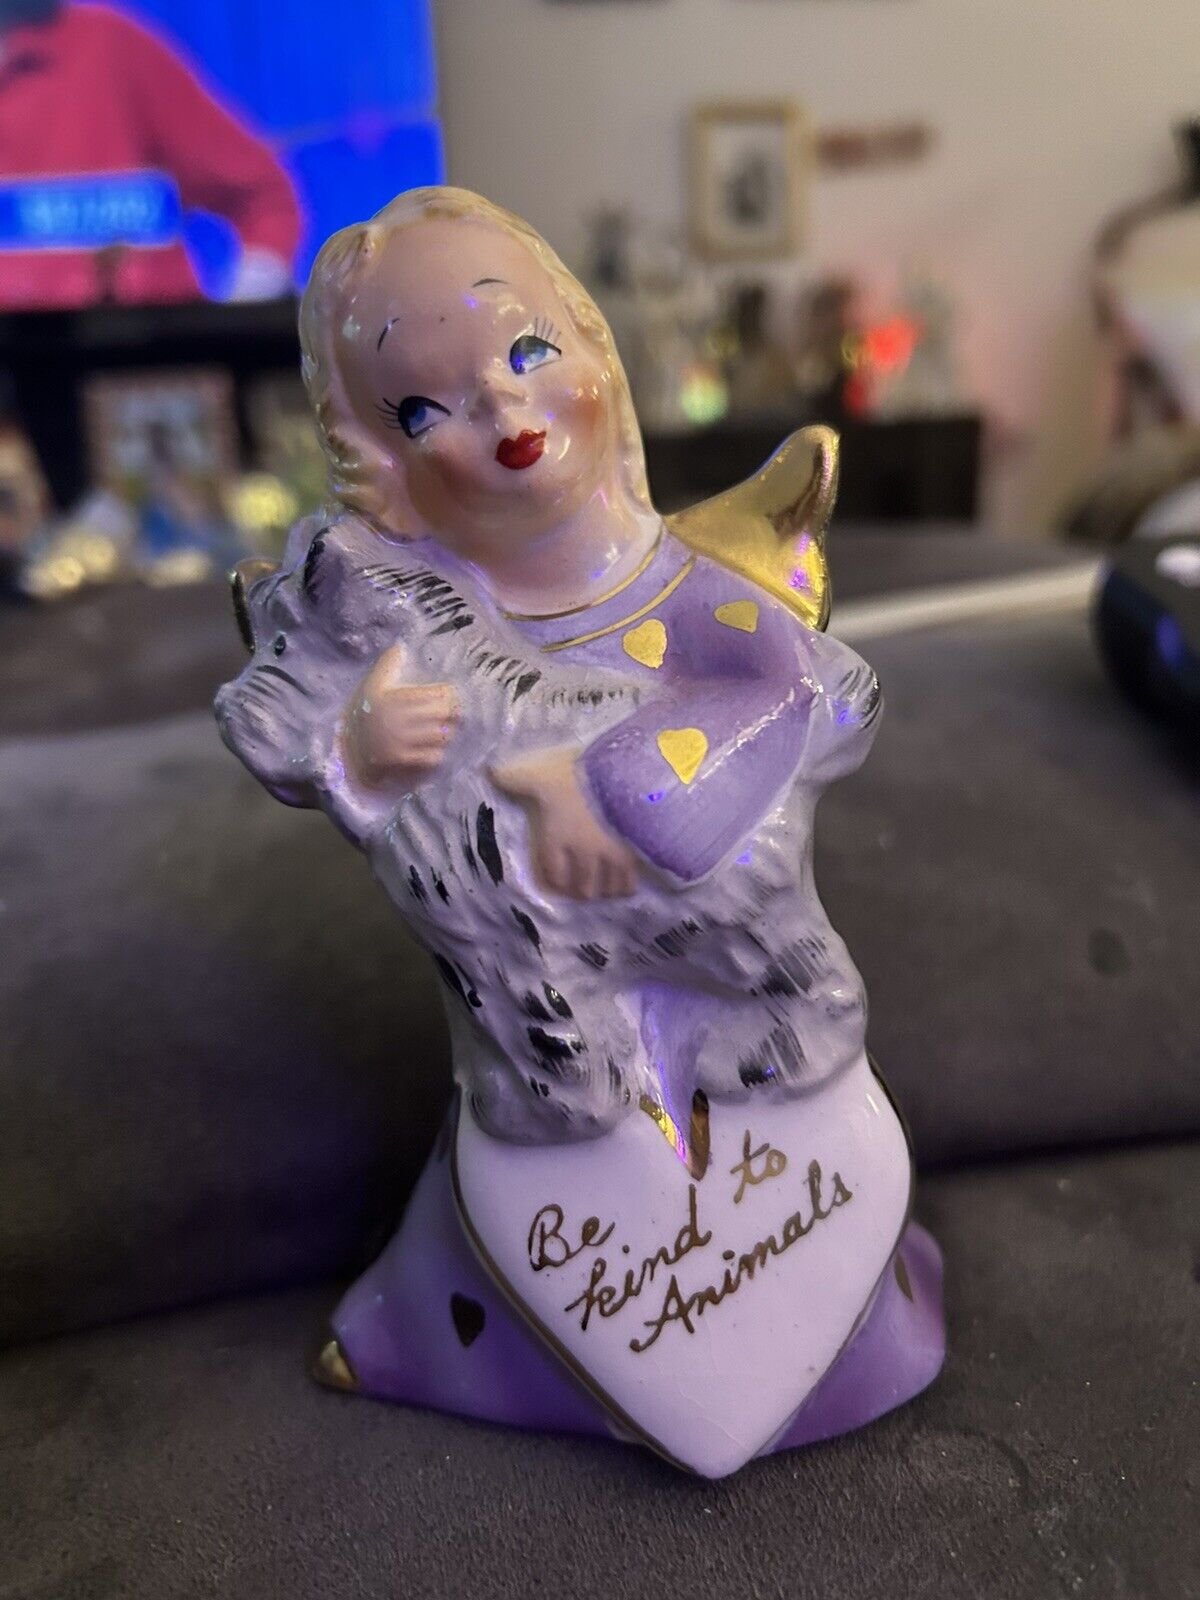 Vintage Yona Shafford Angel Holding A Dog 🐶 It Reads “BE KIND TO ANIMALS”